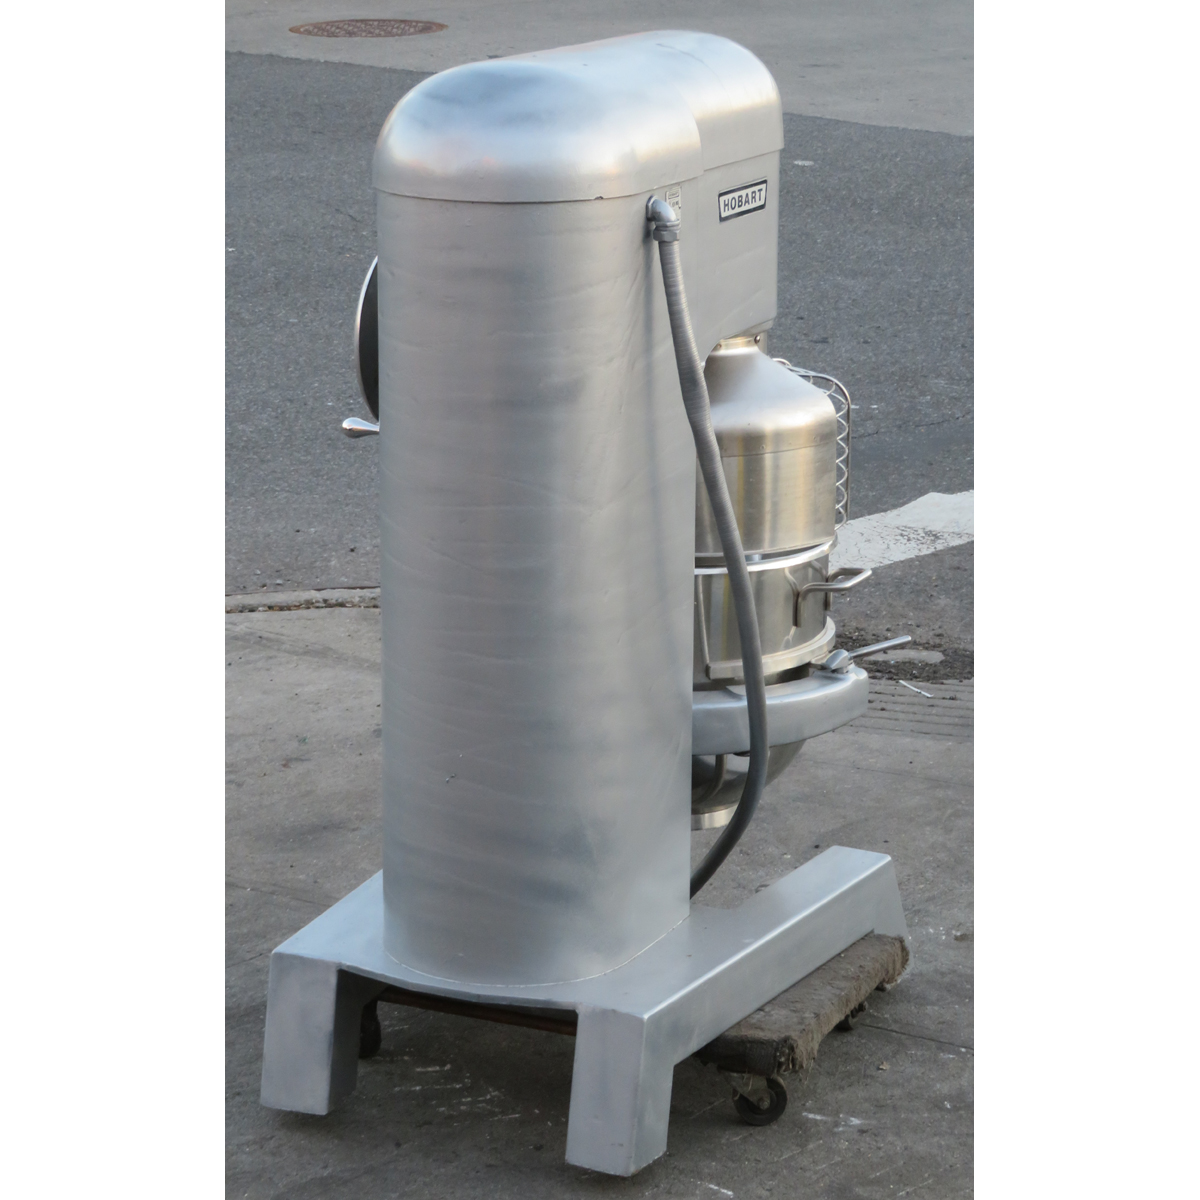 Hobart 60 Quart P660 Pizza Mixer, Used Great Condition image 3